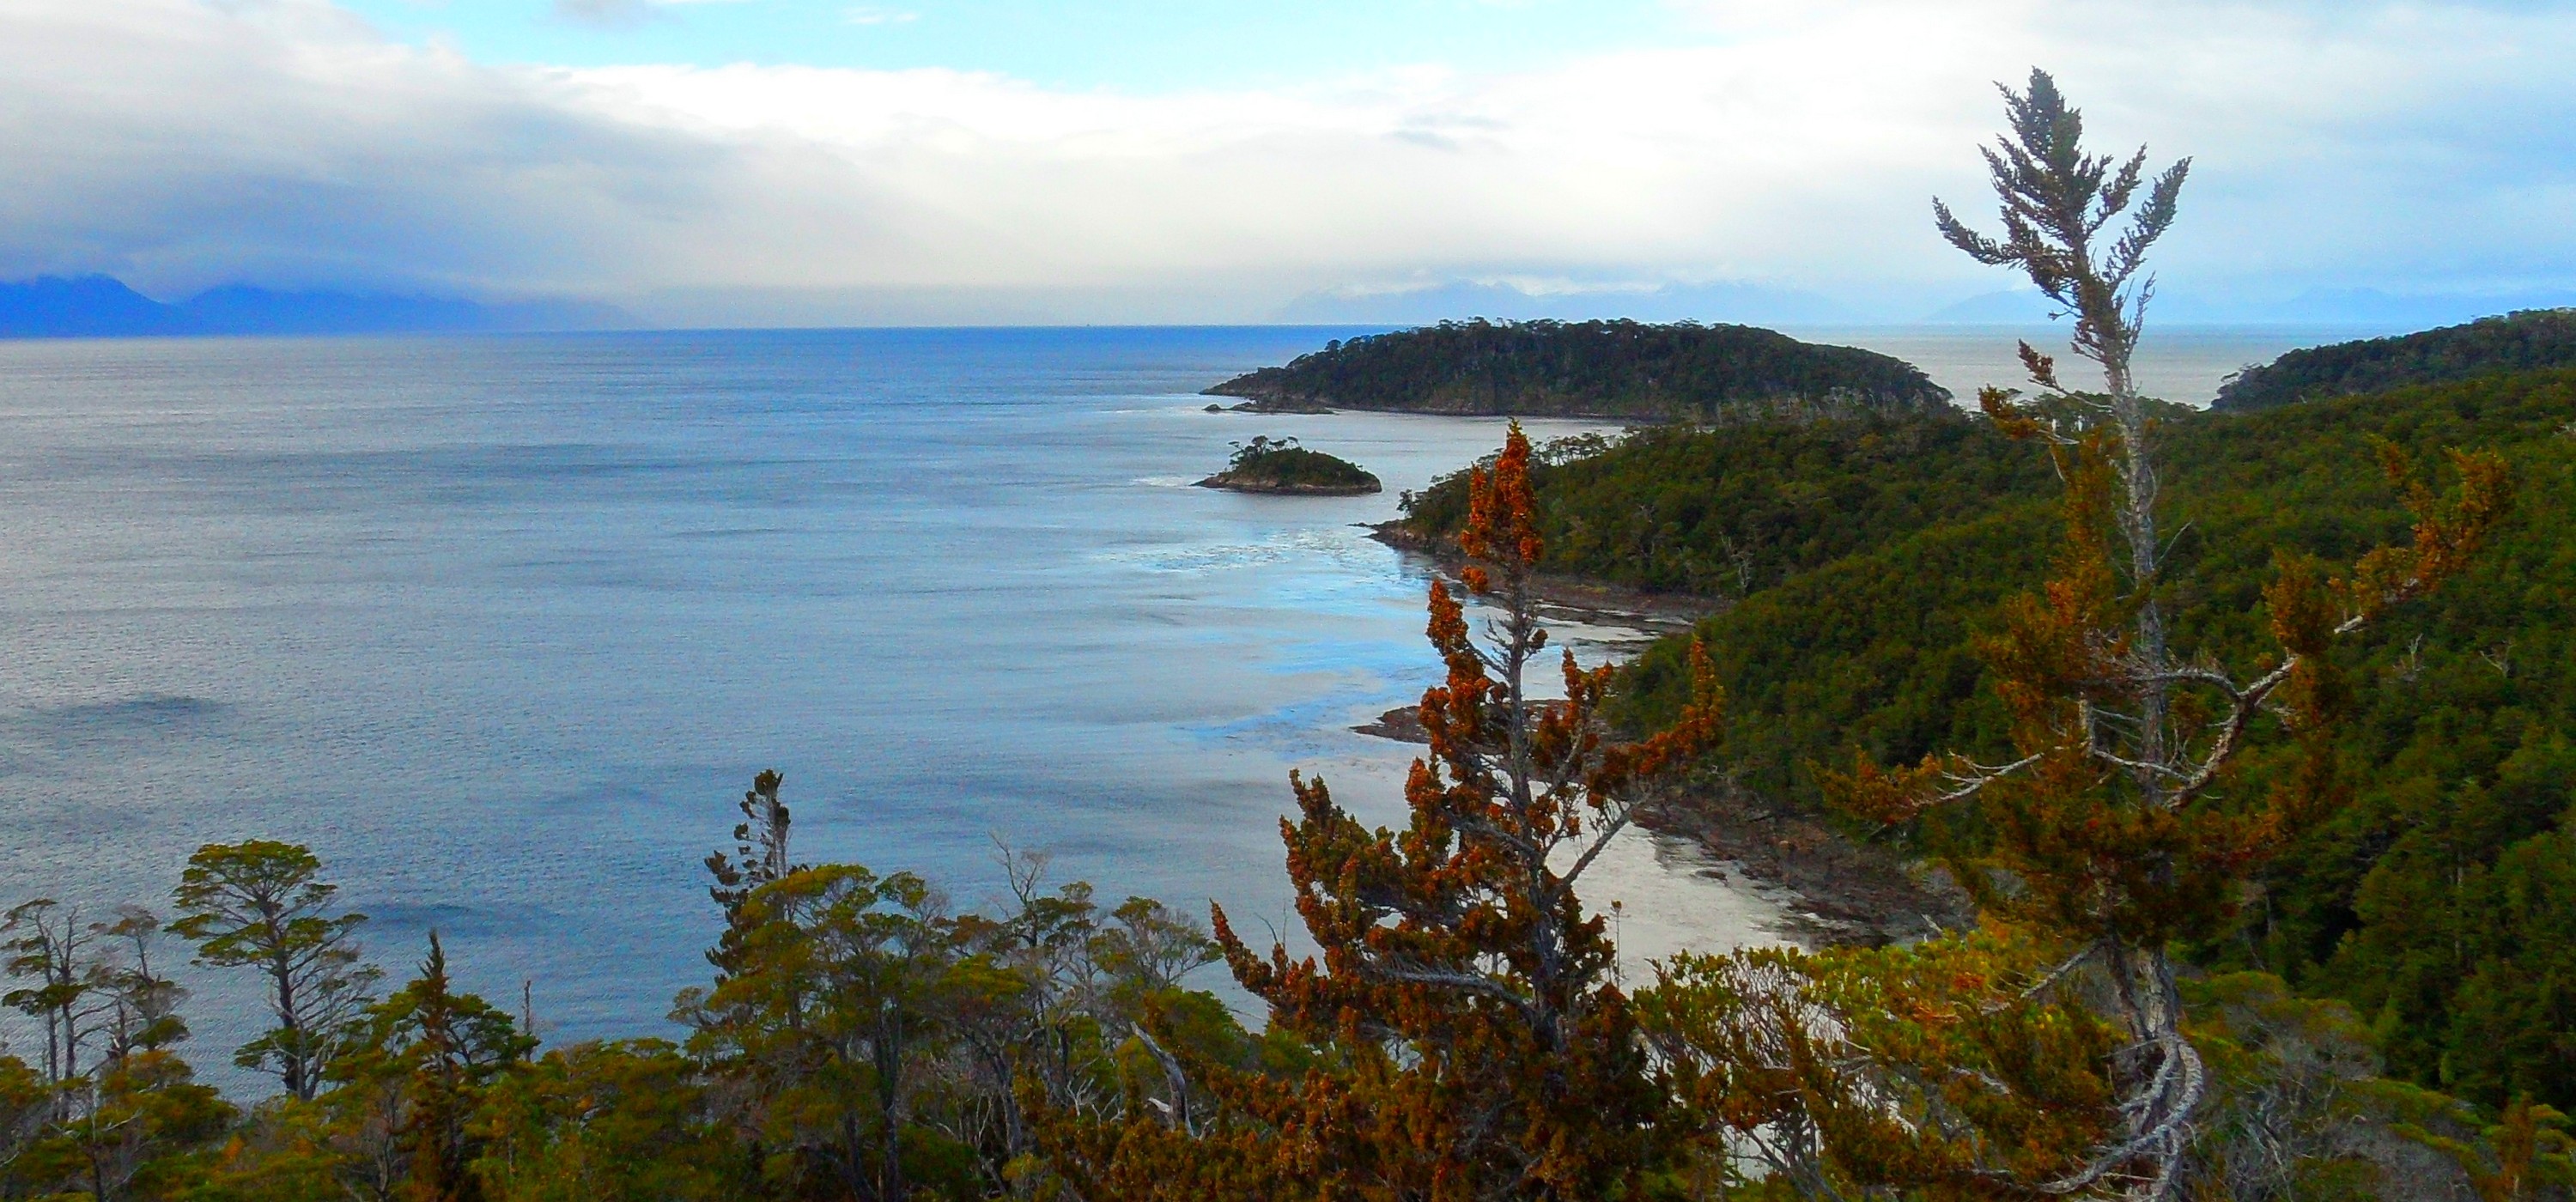 General 3000x1400 nature landscape photography peninsula island forest hills sea trees clouds beach Patagonia Chile South America coast